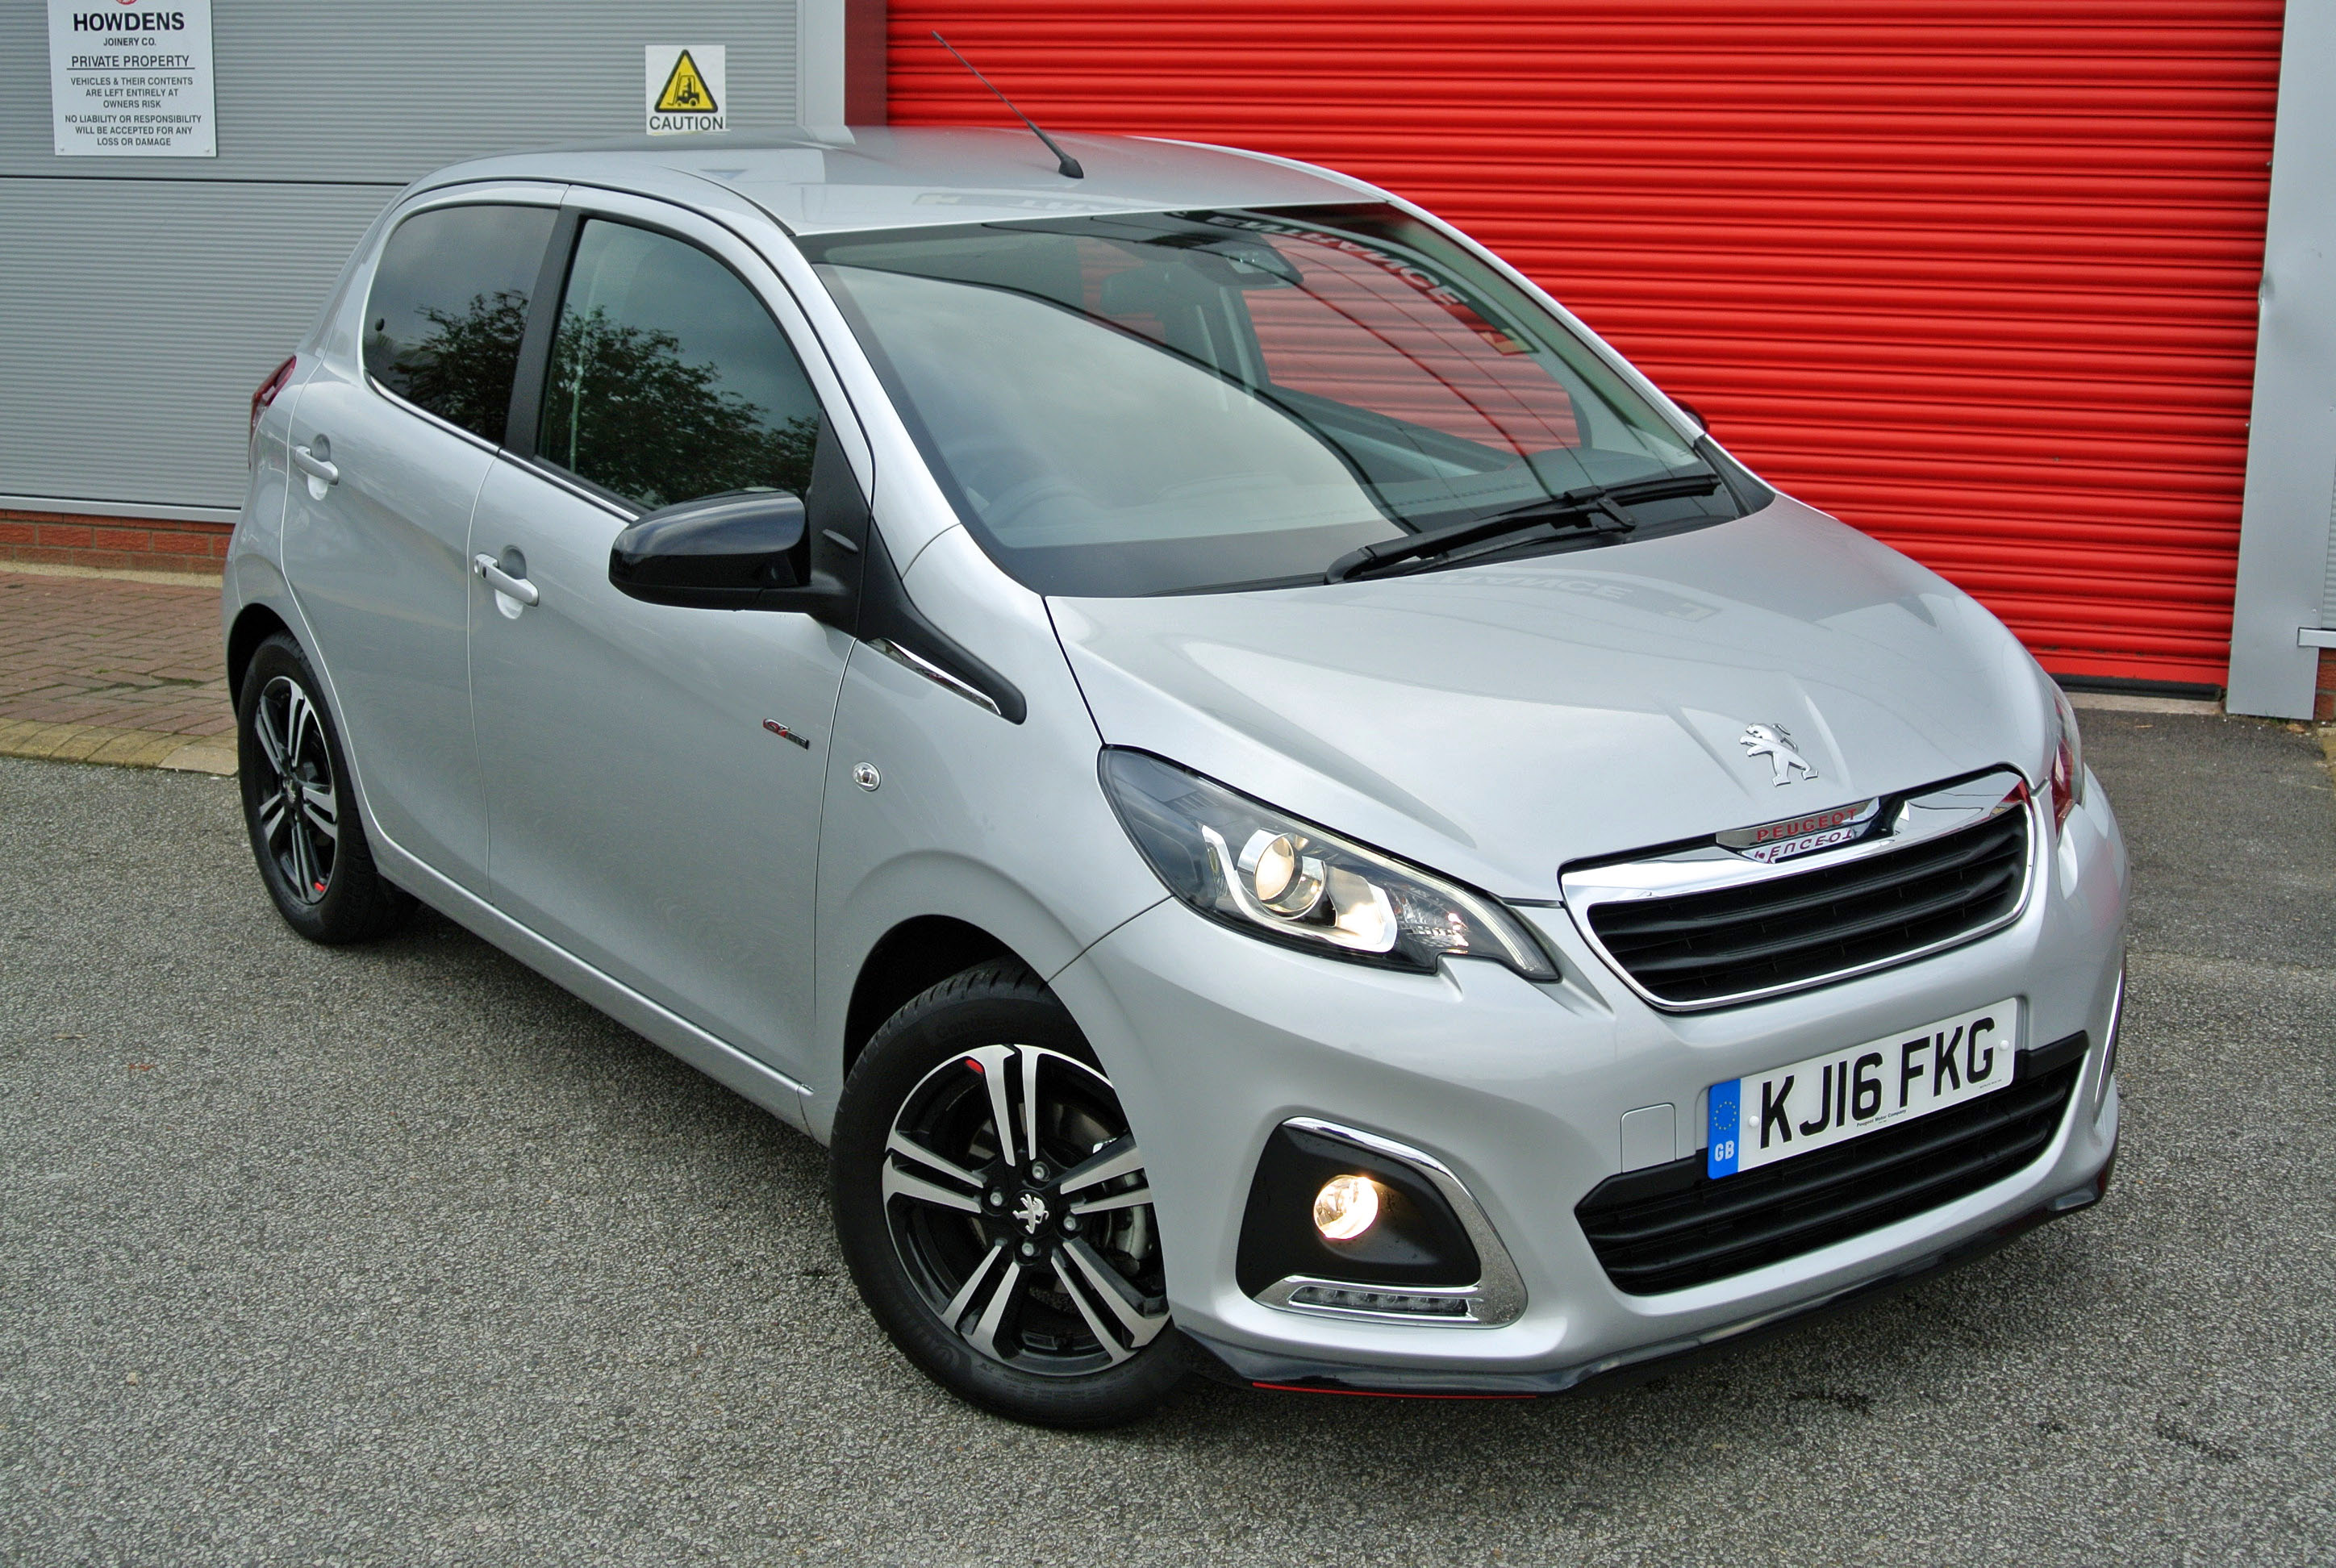 Peugeot 108 turns up the heat, without overcooking the recipe